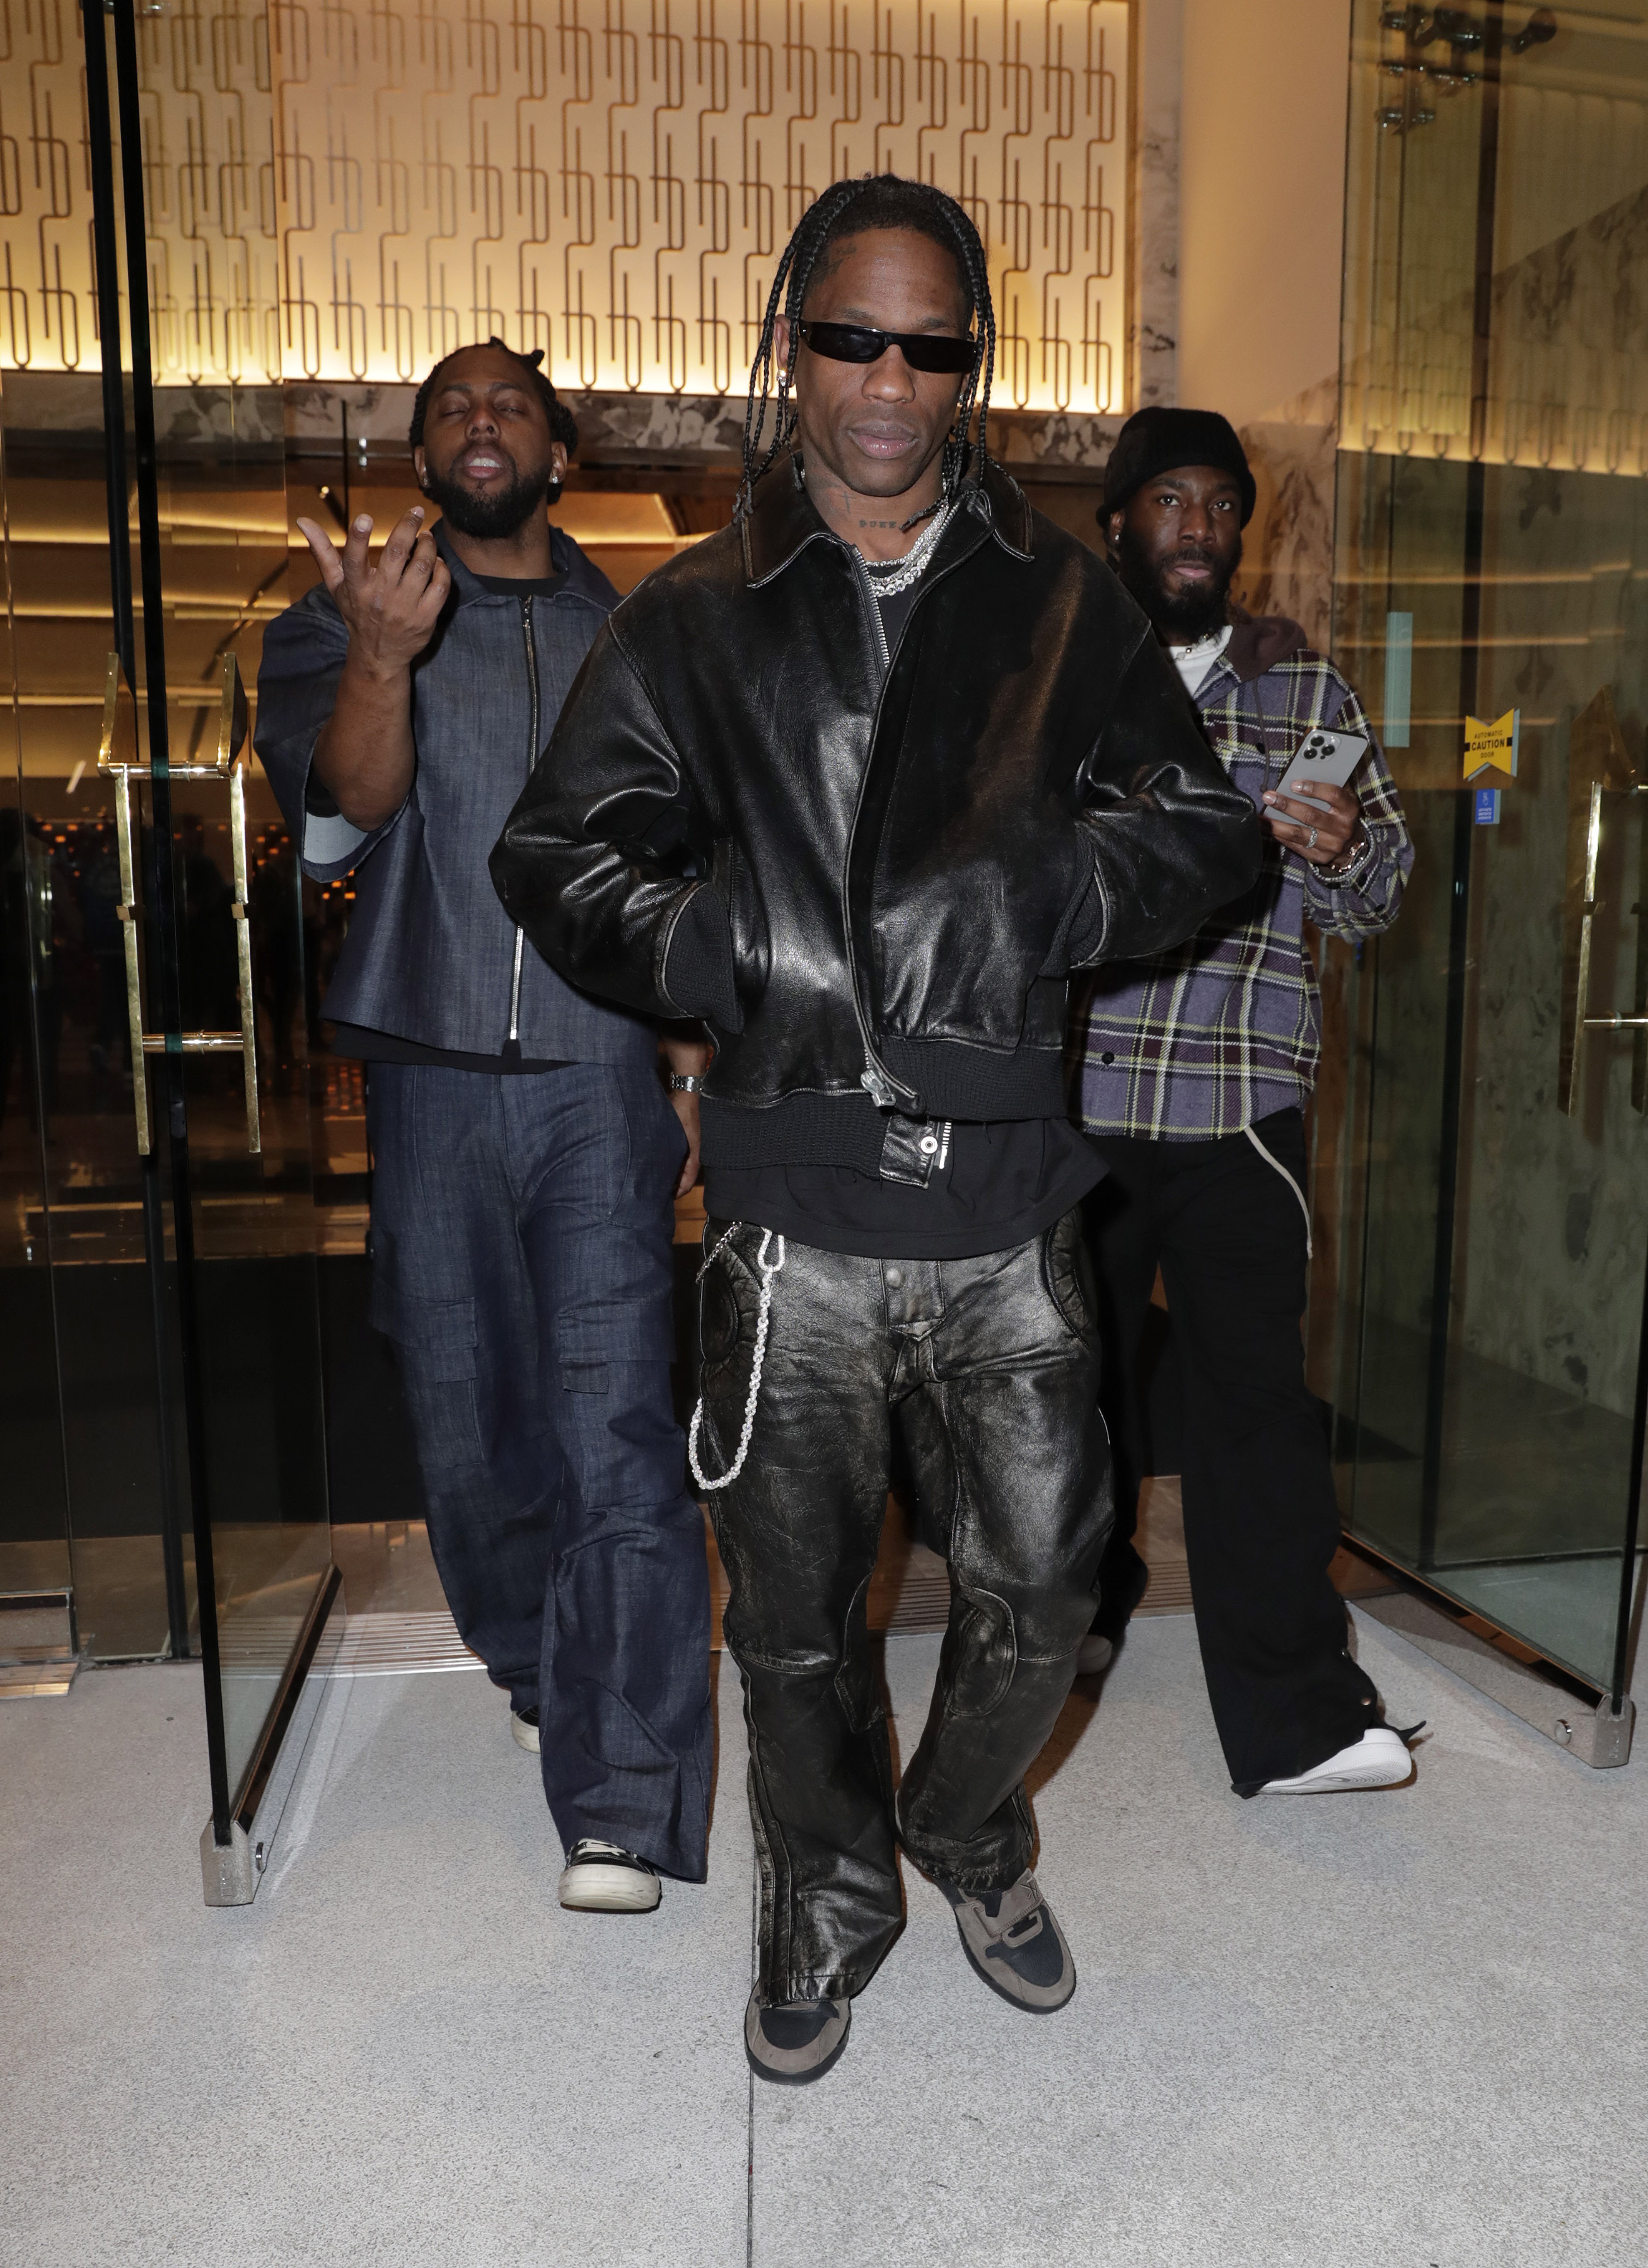 He was then seen leaving the Fontainebleau Las Vegas Hotel after Jay Z's party